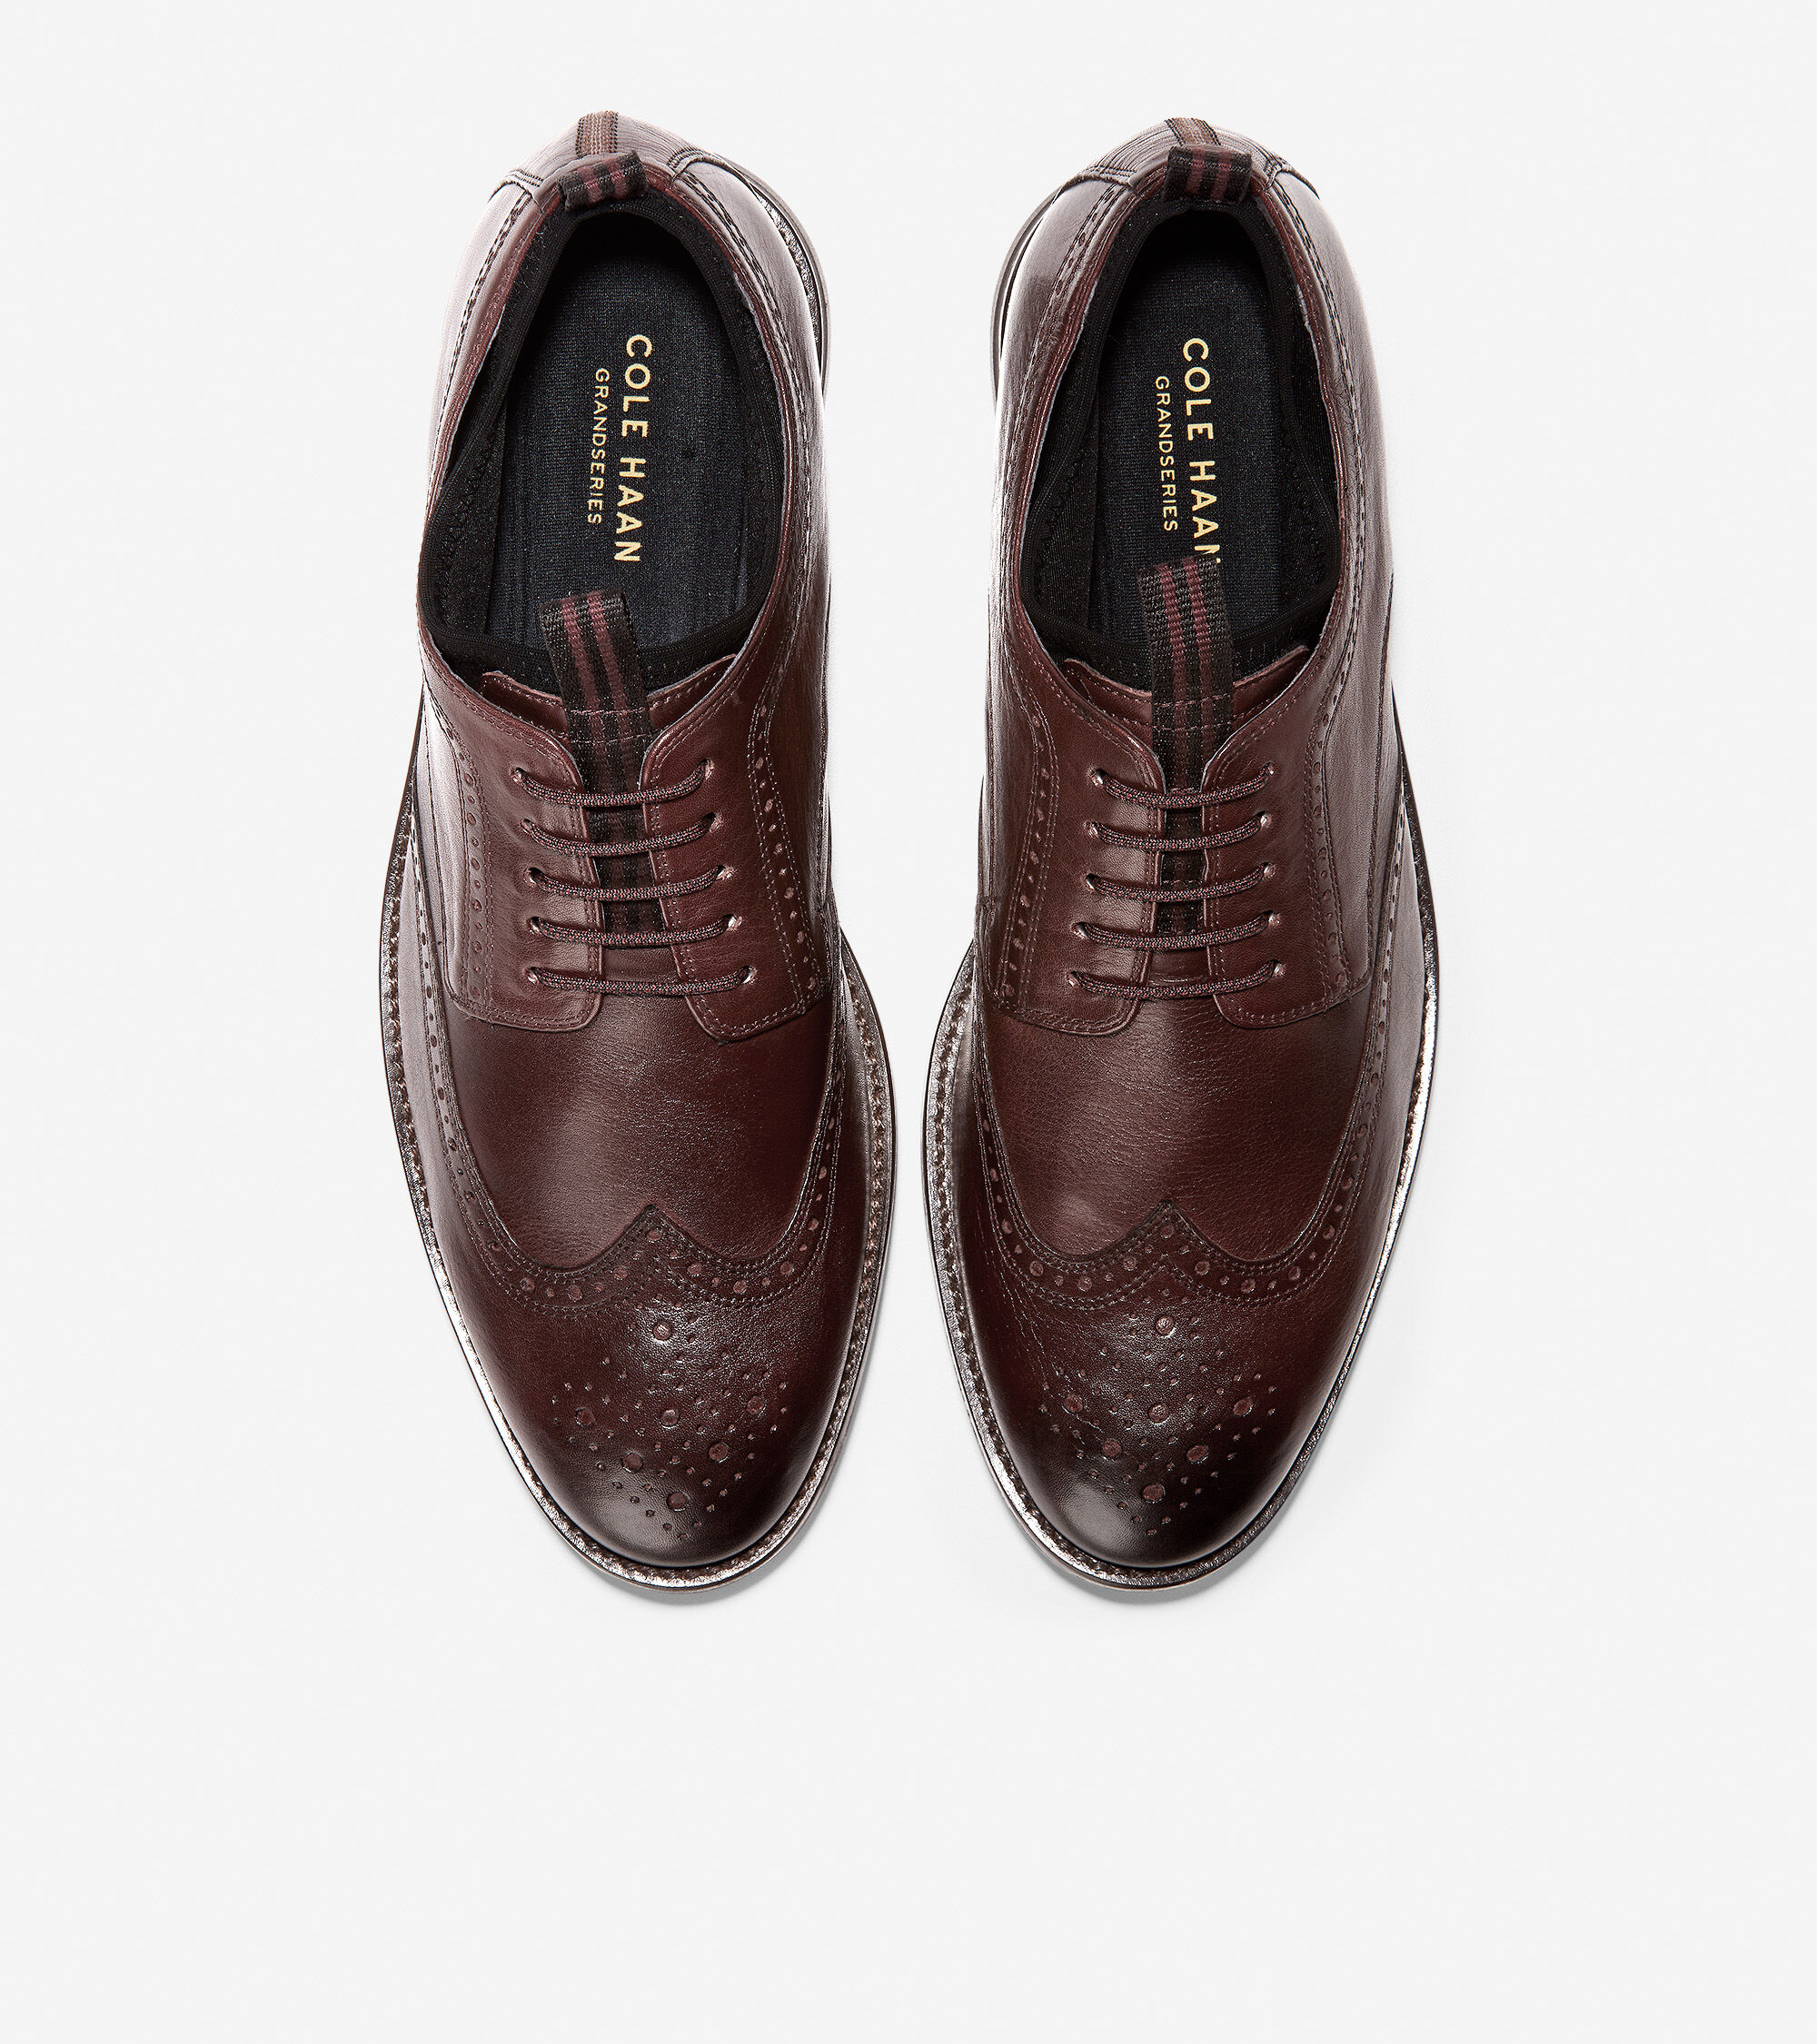 Holland Long Wing Oxford in Cordovan 